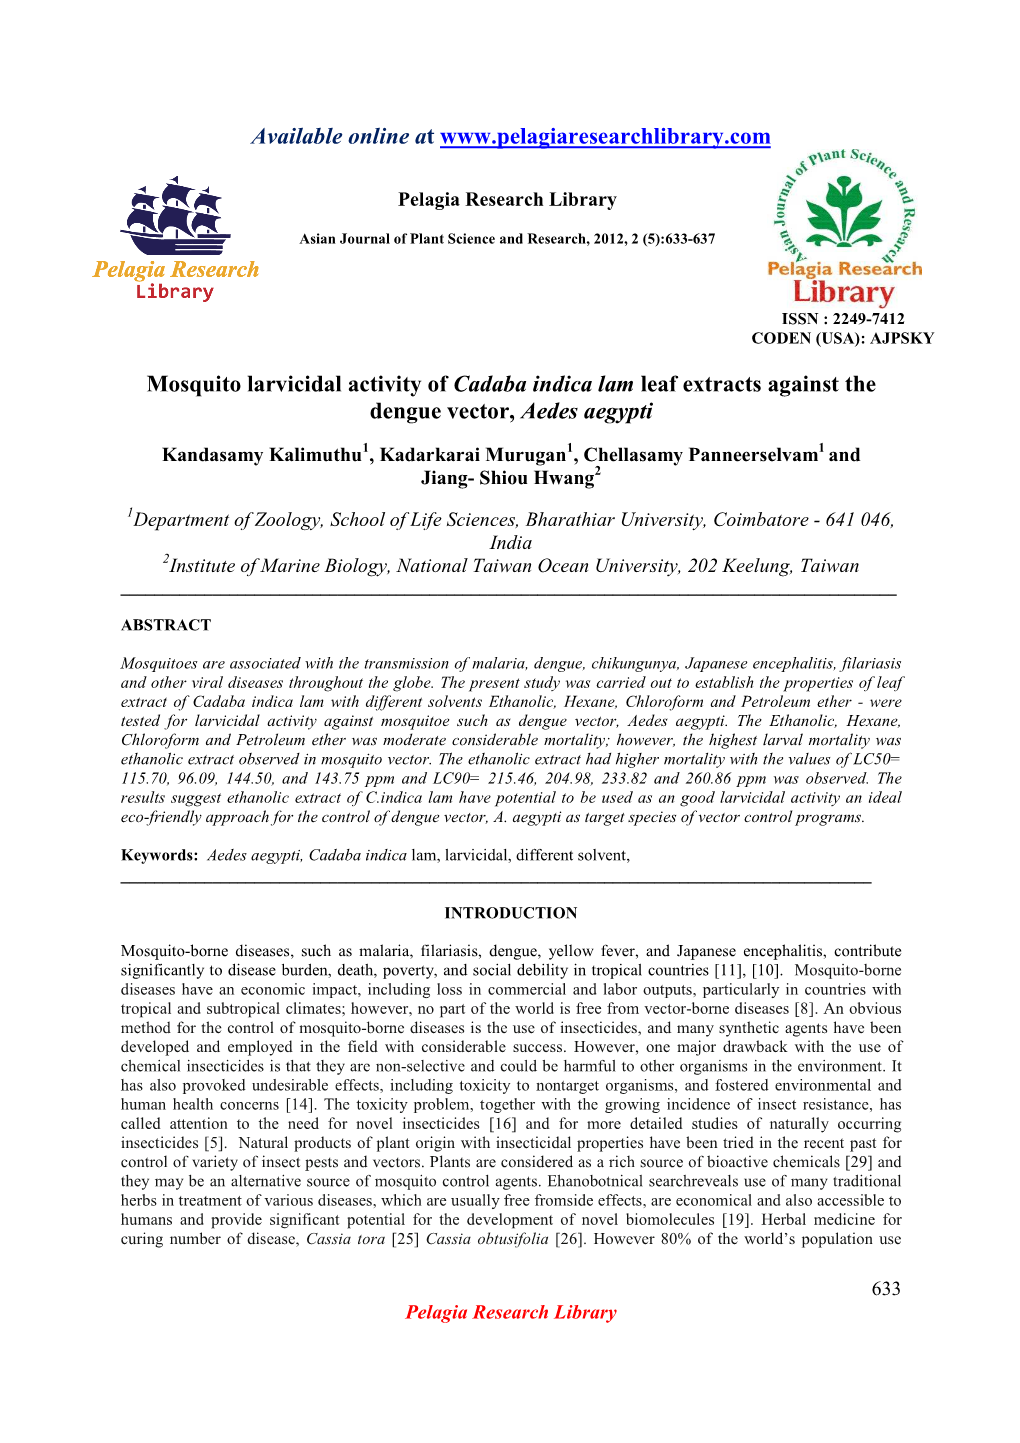 Mosquito Larvicidal Activity of Cadaba Indica Lam Leaf Extracts Against the Dengue Vector, Aedes Aegypti